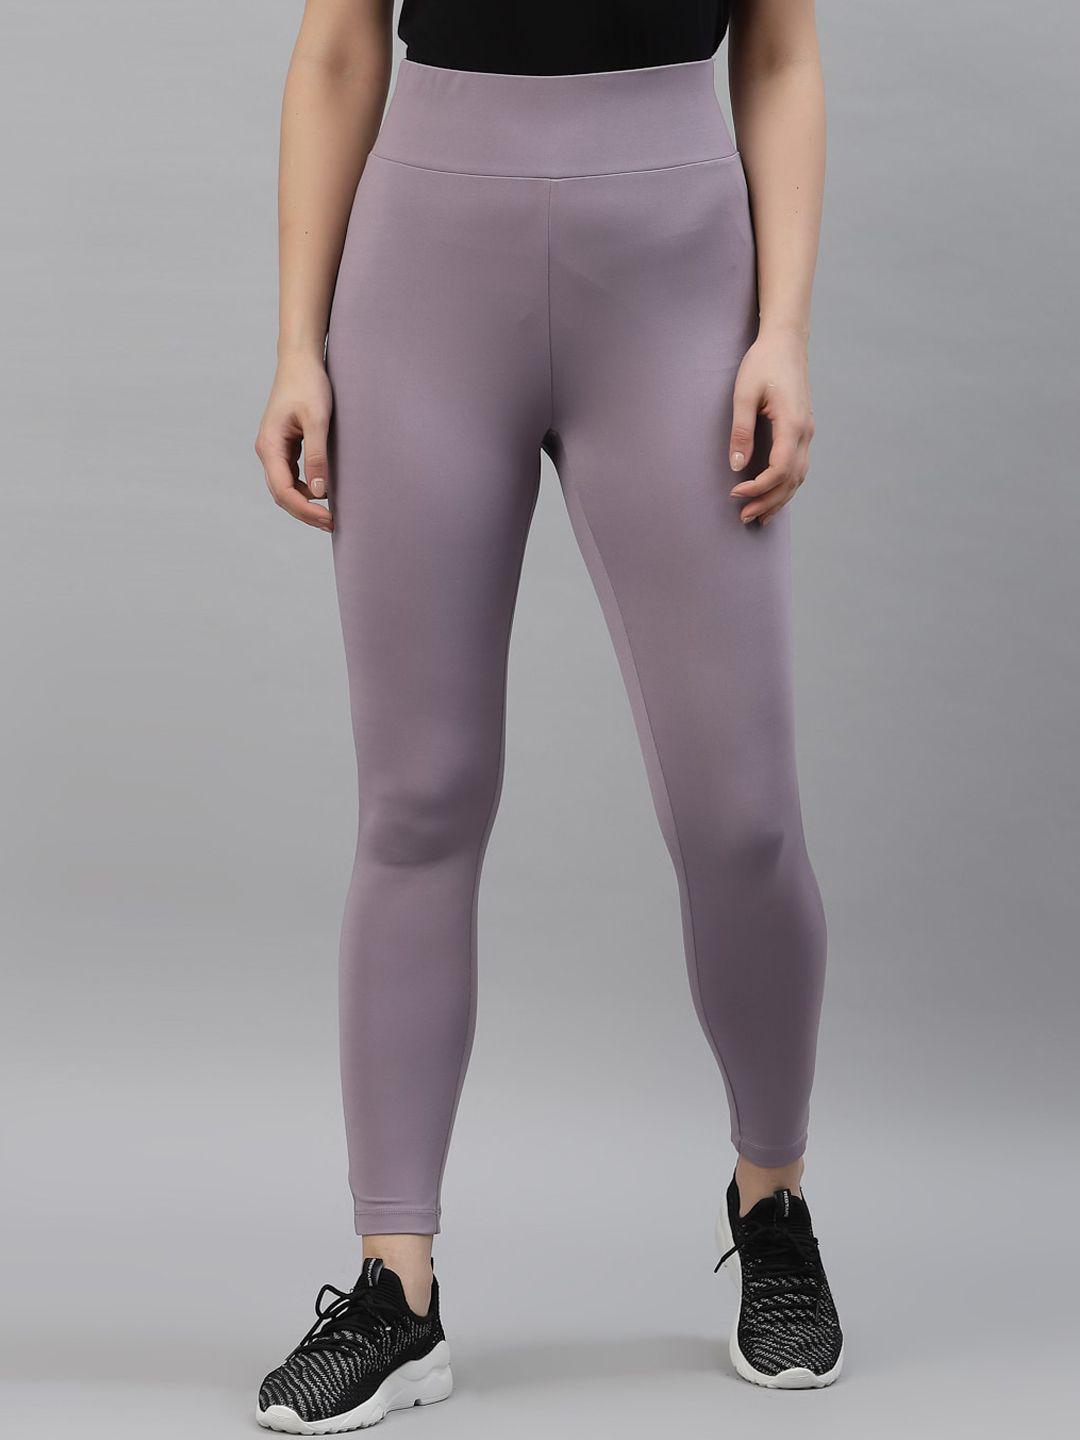 red tape women mauve solid sports legging